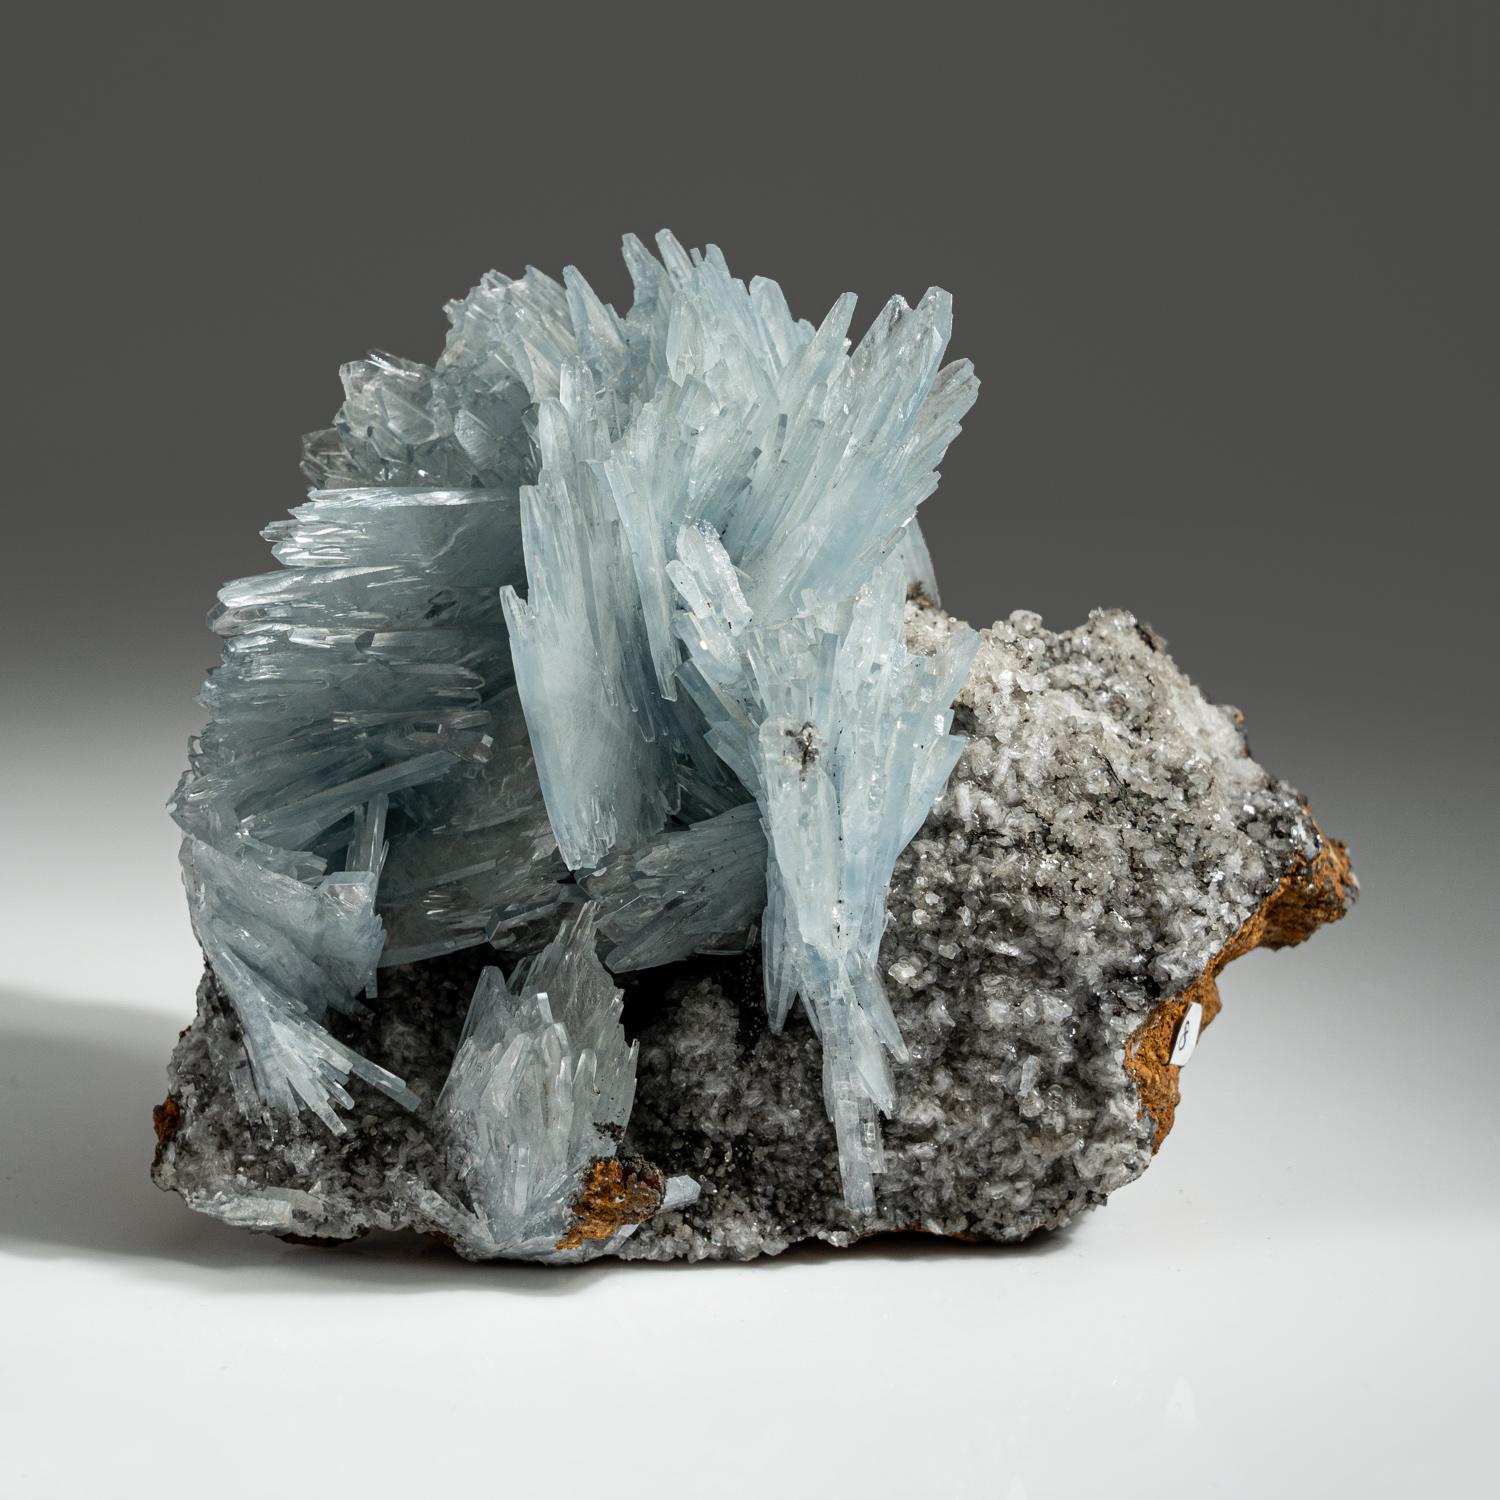 From Jebel Ouichane, Beni Bou Ifrour, Nador, Nador Province, Oriental Region, Morocco

Lustrous transparent blue-gray bladed barite crystals in intersecting aggregates of subparallel crystals on matrix. Note the small transparent colorless barite